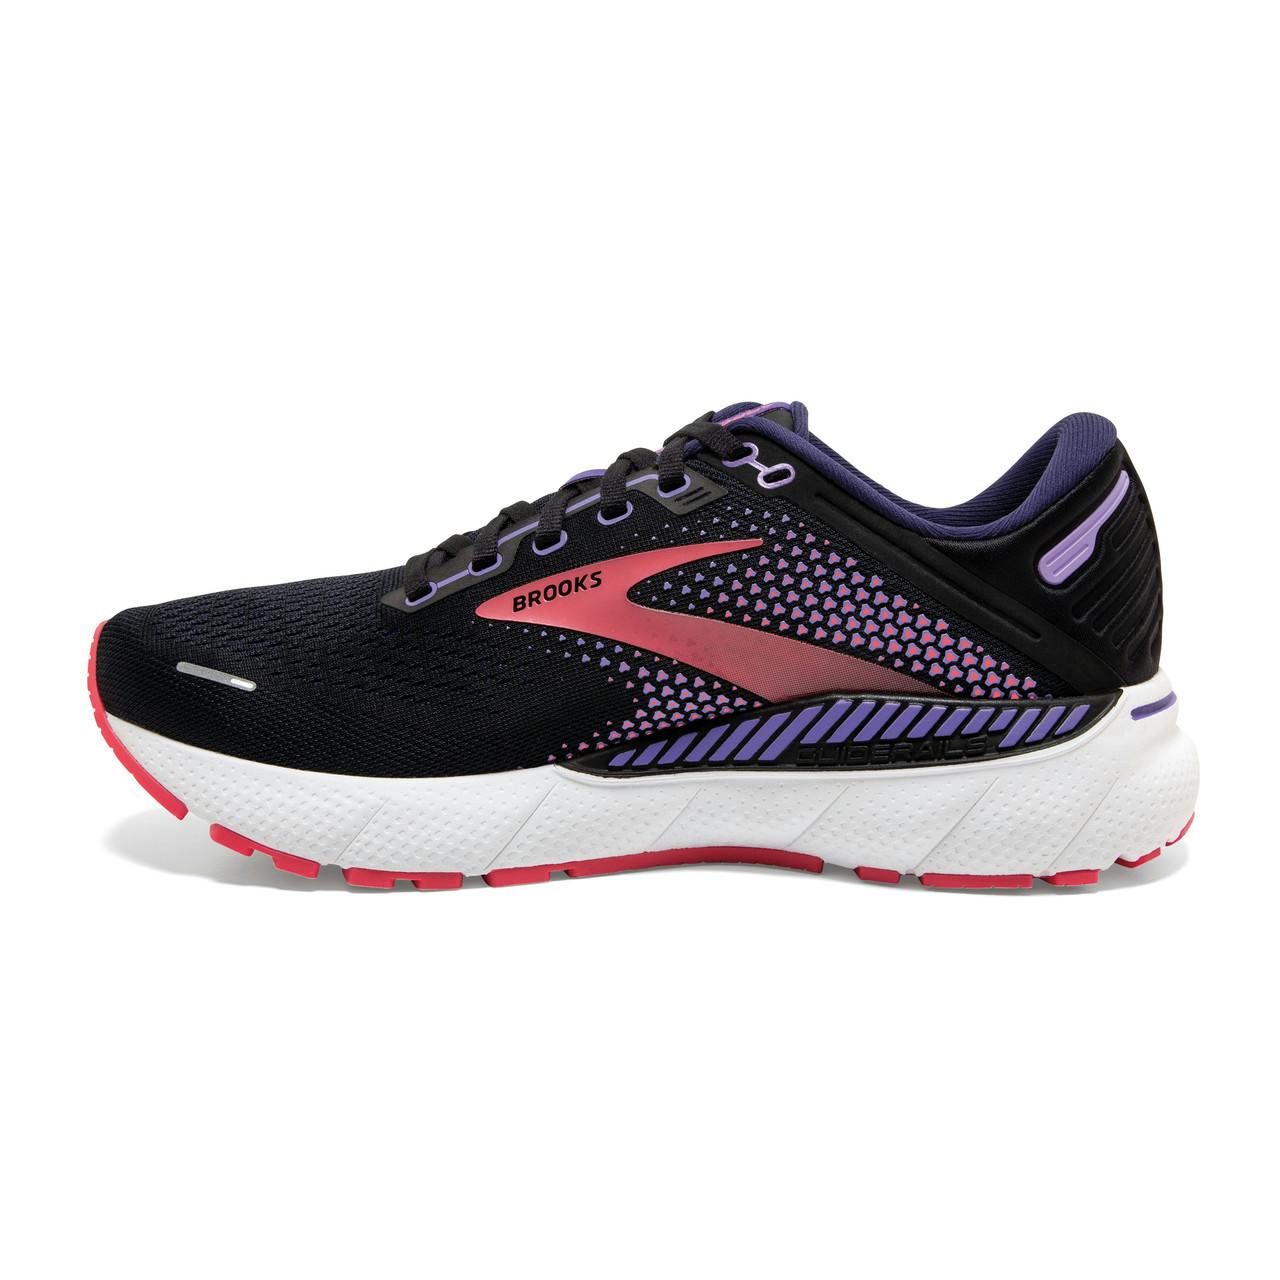 Adrenaline GTS 22 Road Running Shoes Black/Purple/Coral